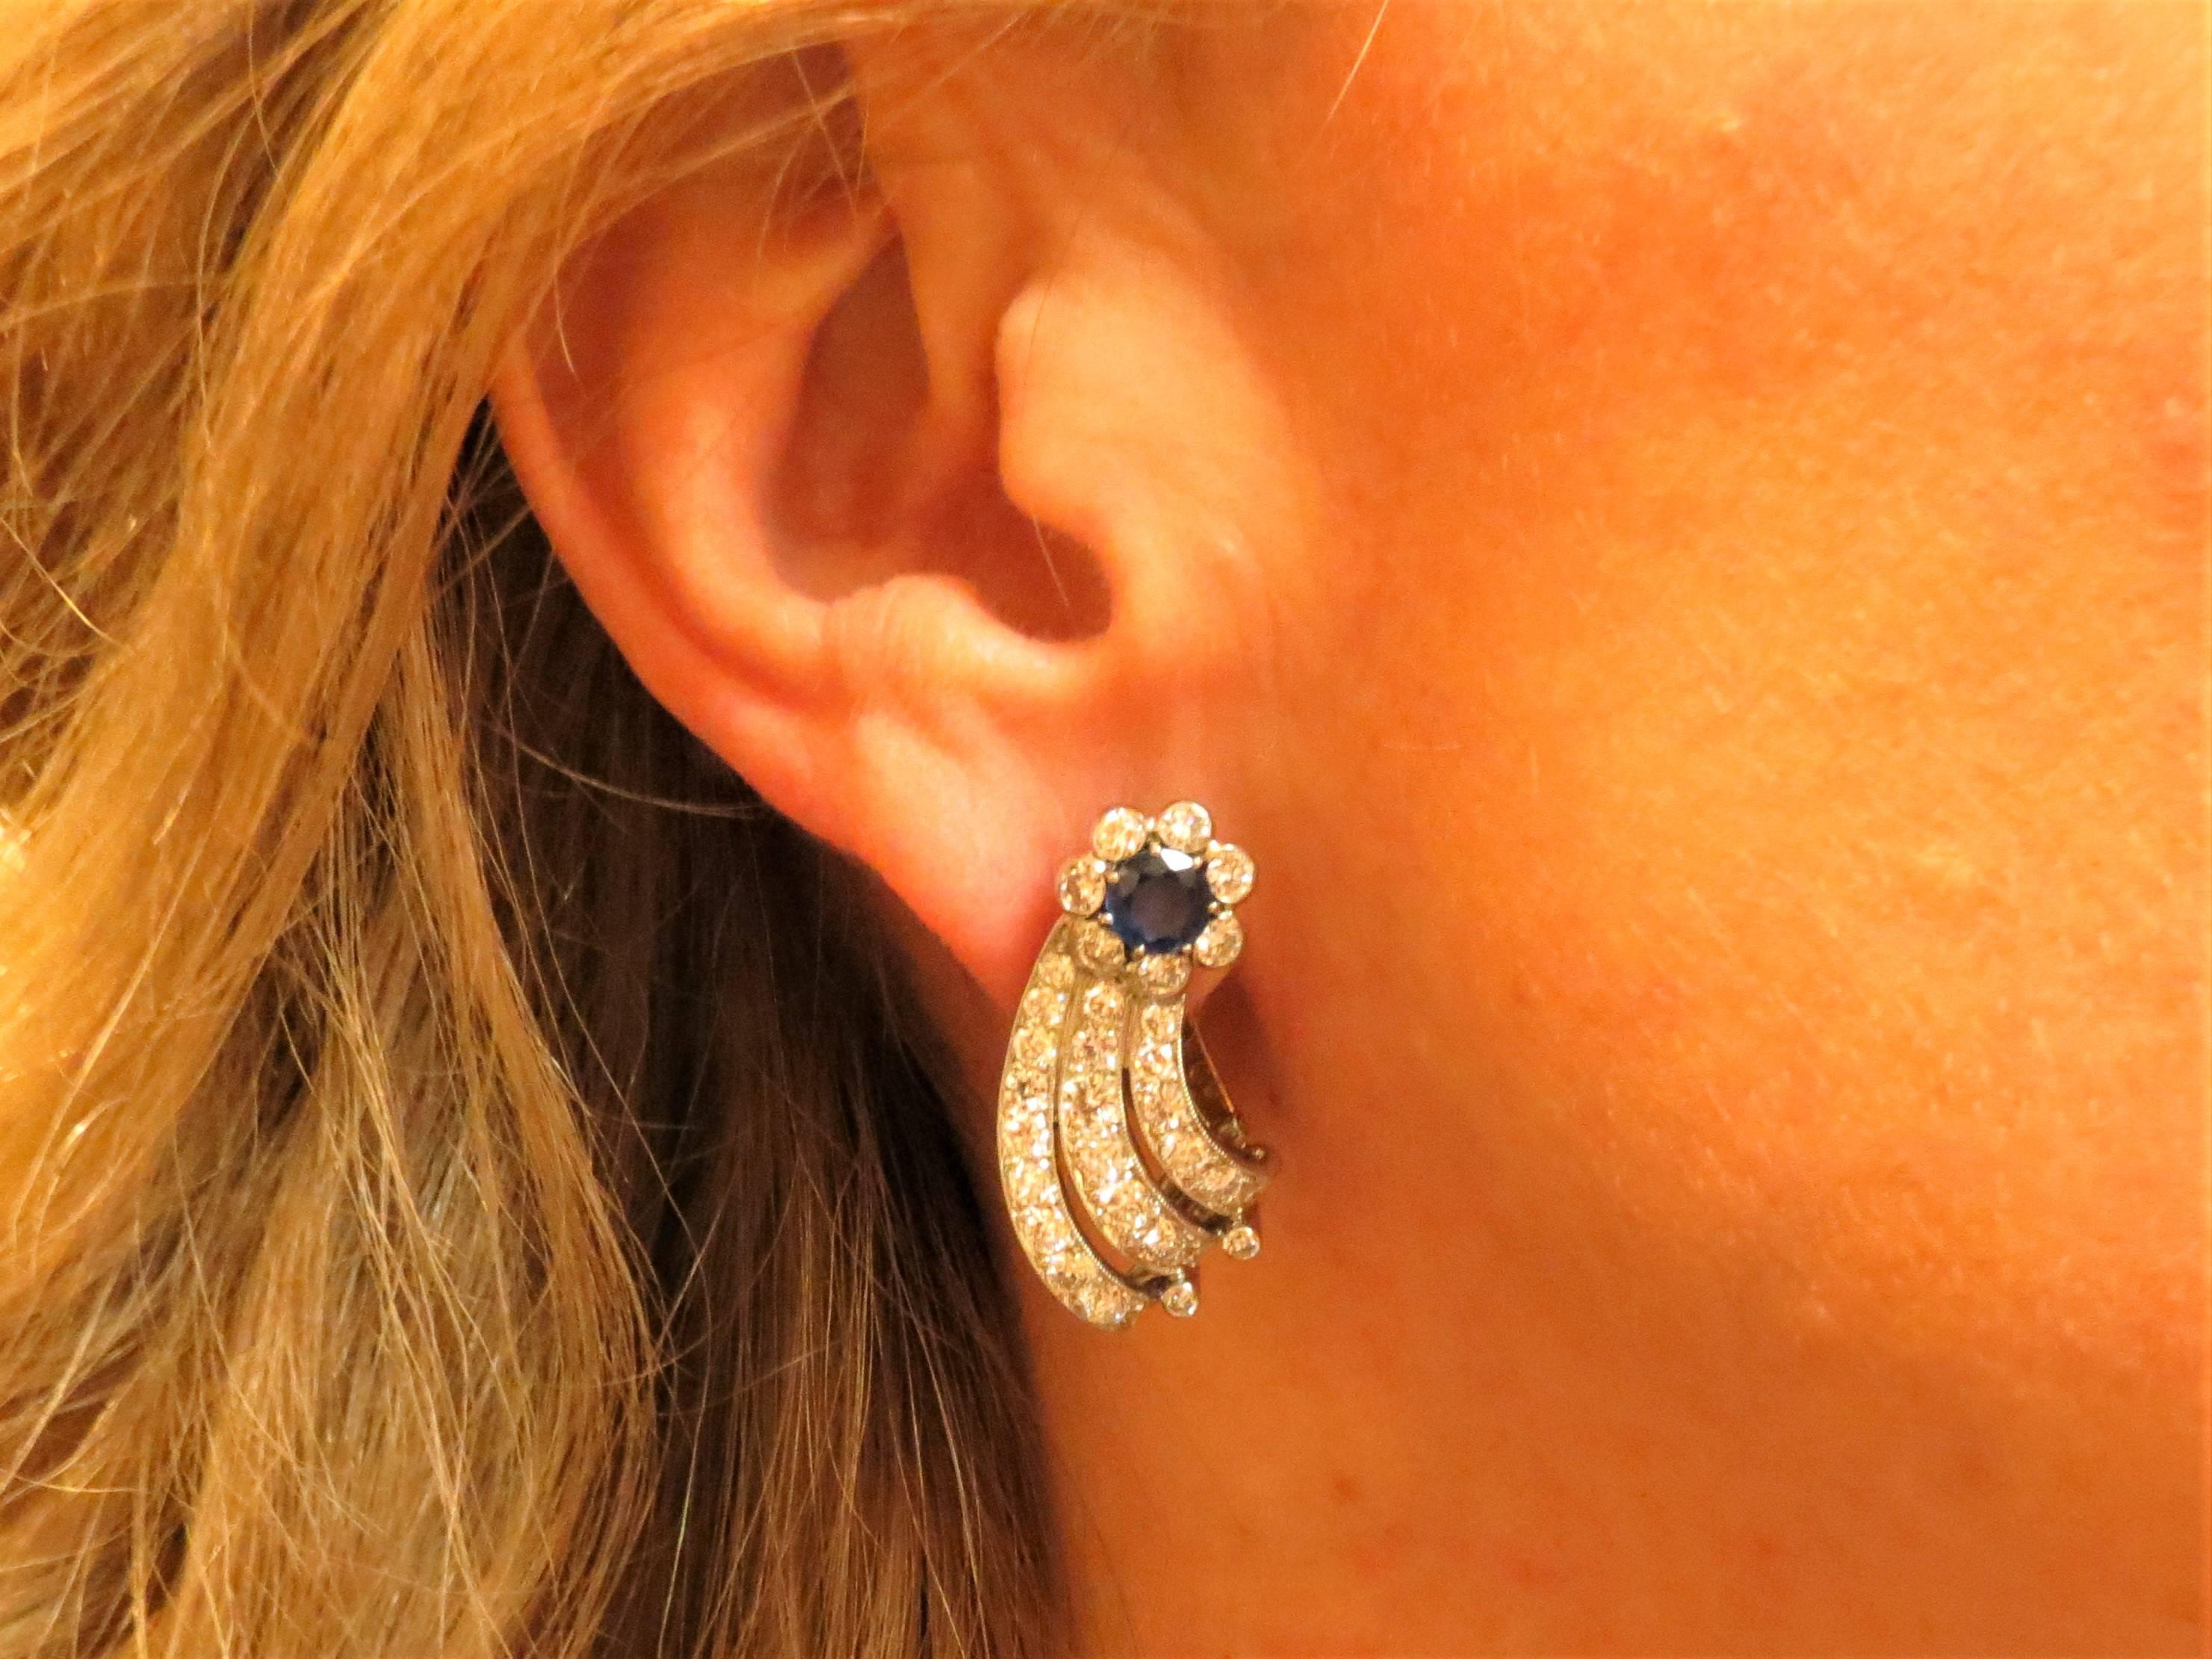 Platinum  ear clips prong set with two round faceted blue sapphires weighing 1.30cts and 64 full cut round diamonds weighing 3.50cts, G-H color, VS clarity, with 14K yellow gold clip back.